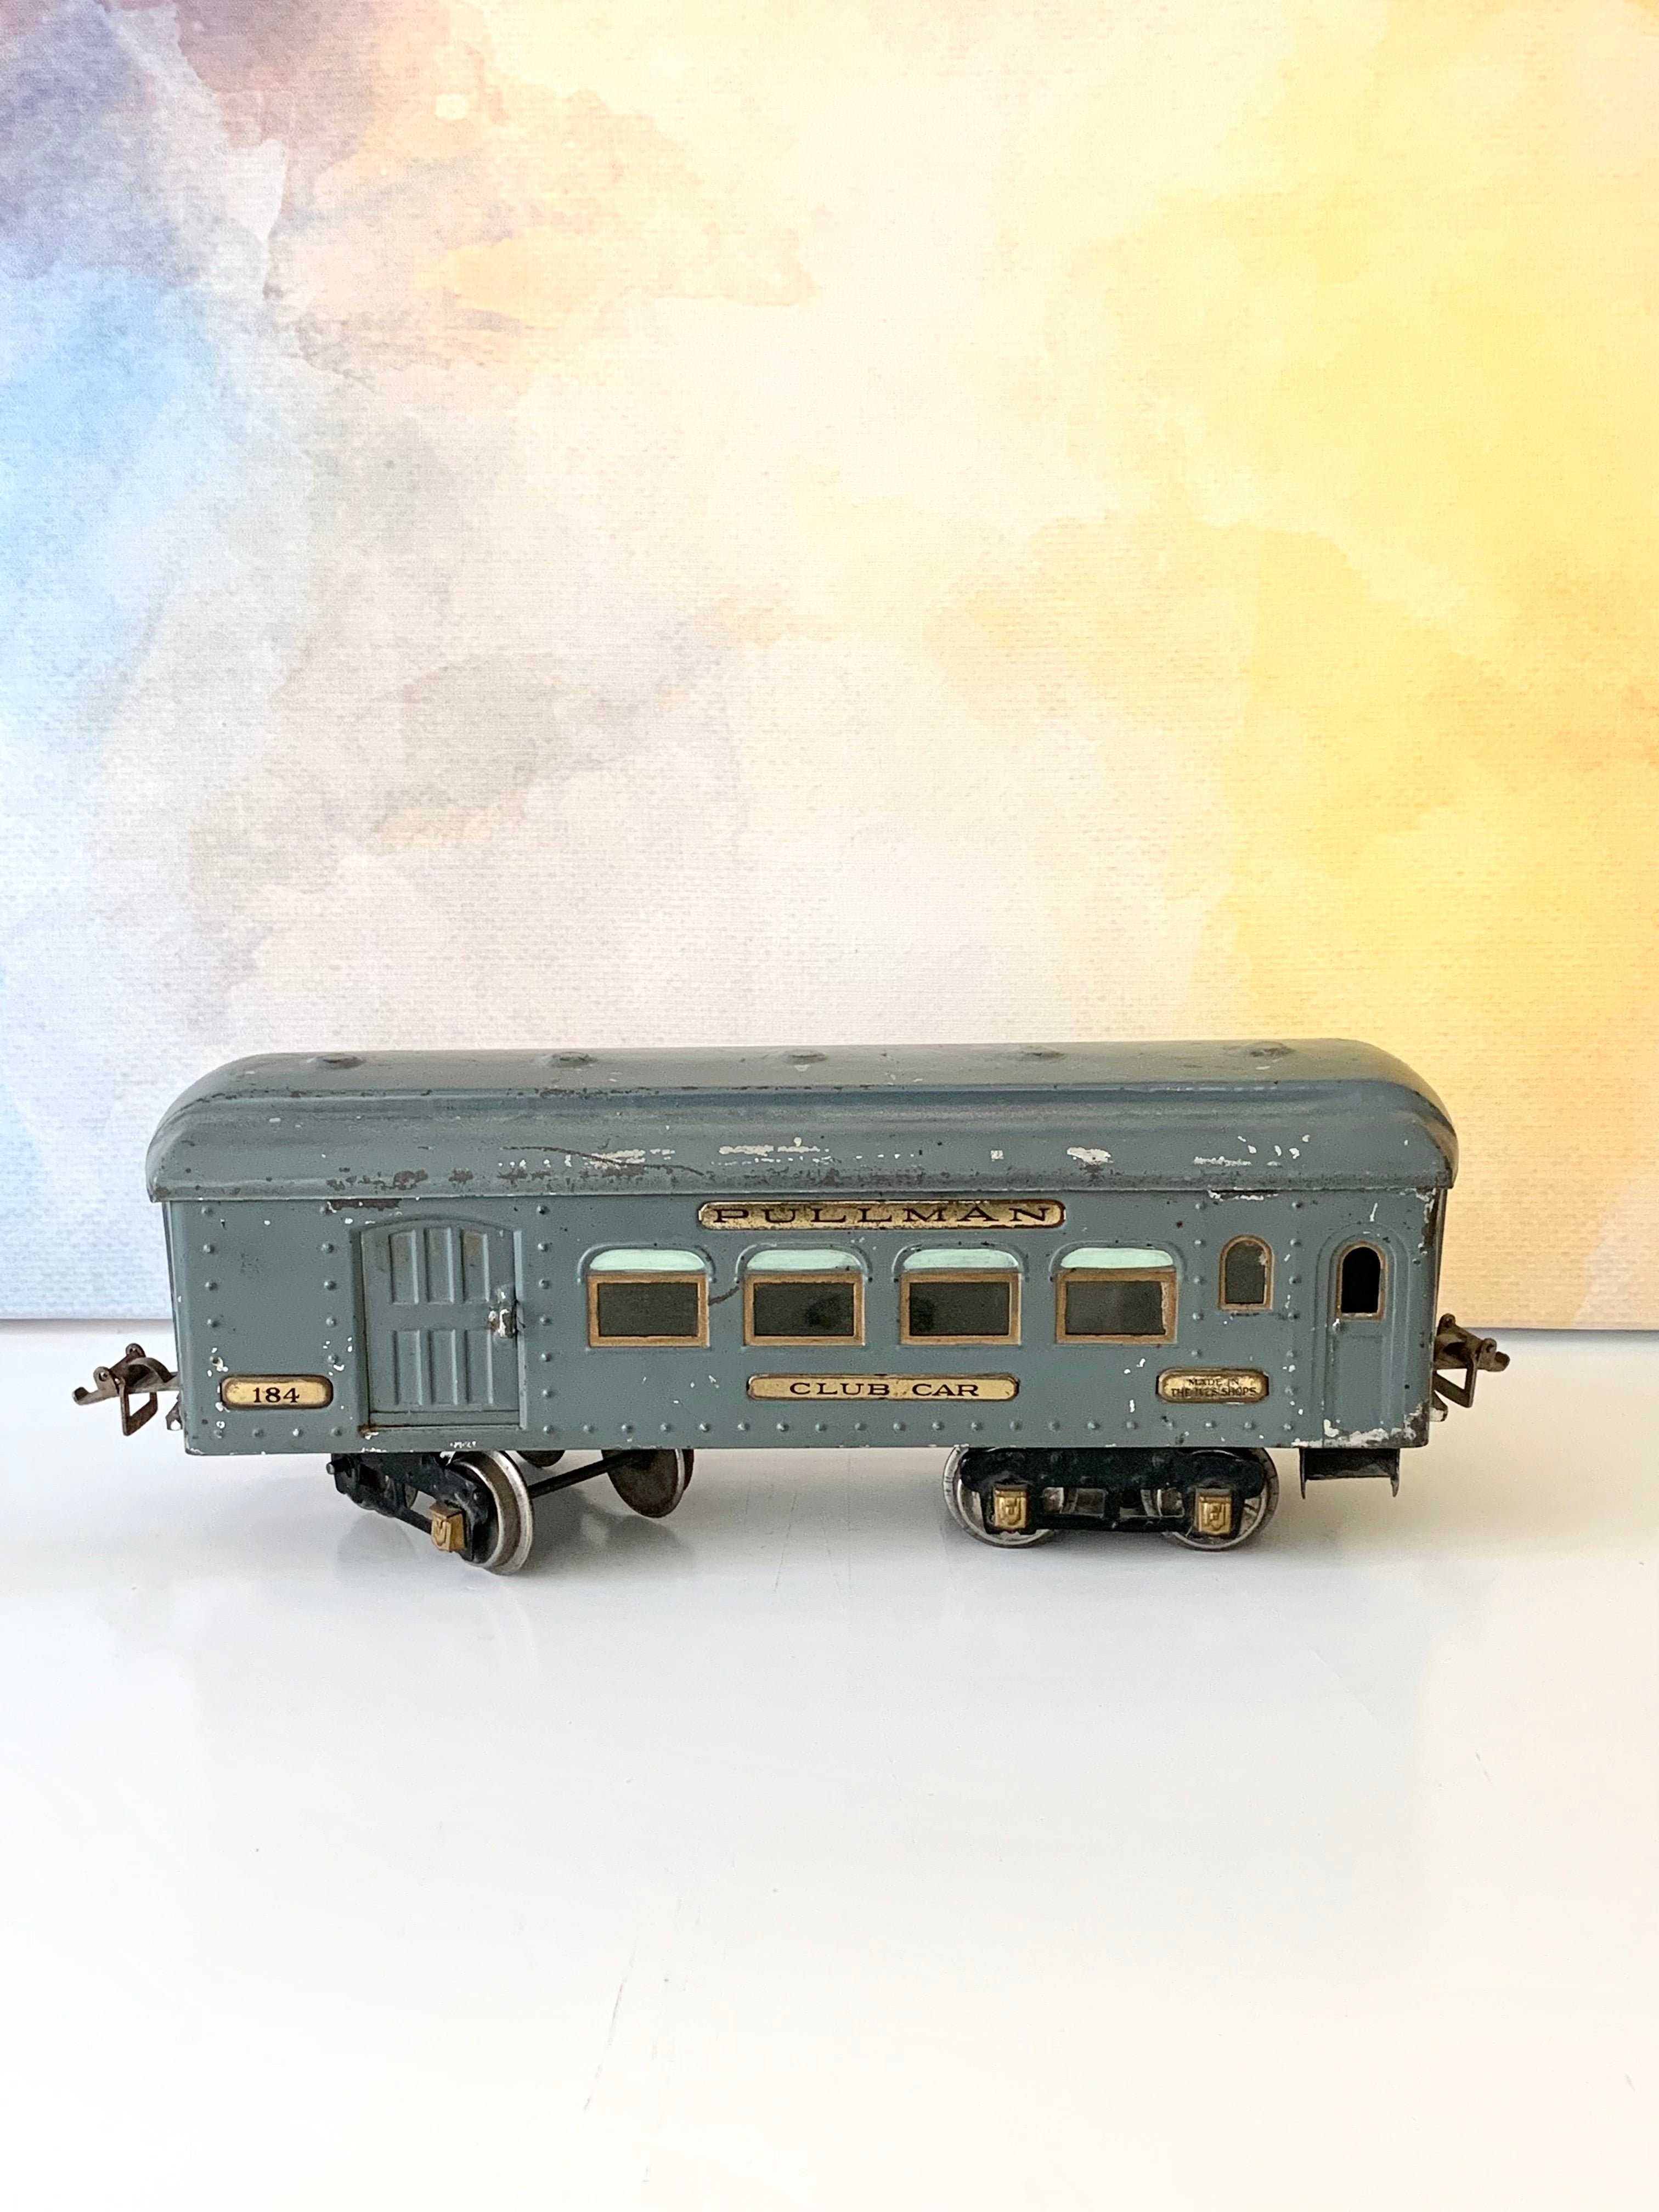 Ives "184" Train Pullman Club Car Collectible Model Train; Vintage Home; Office Decor